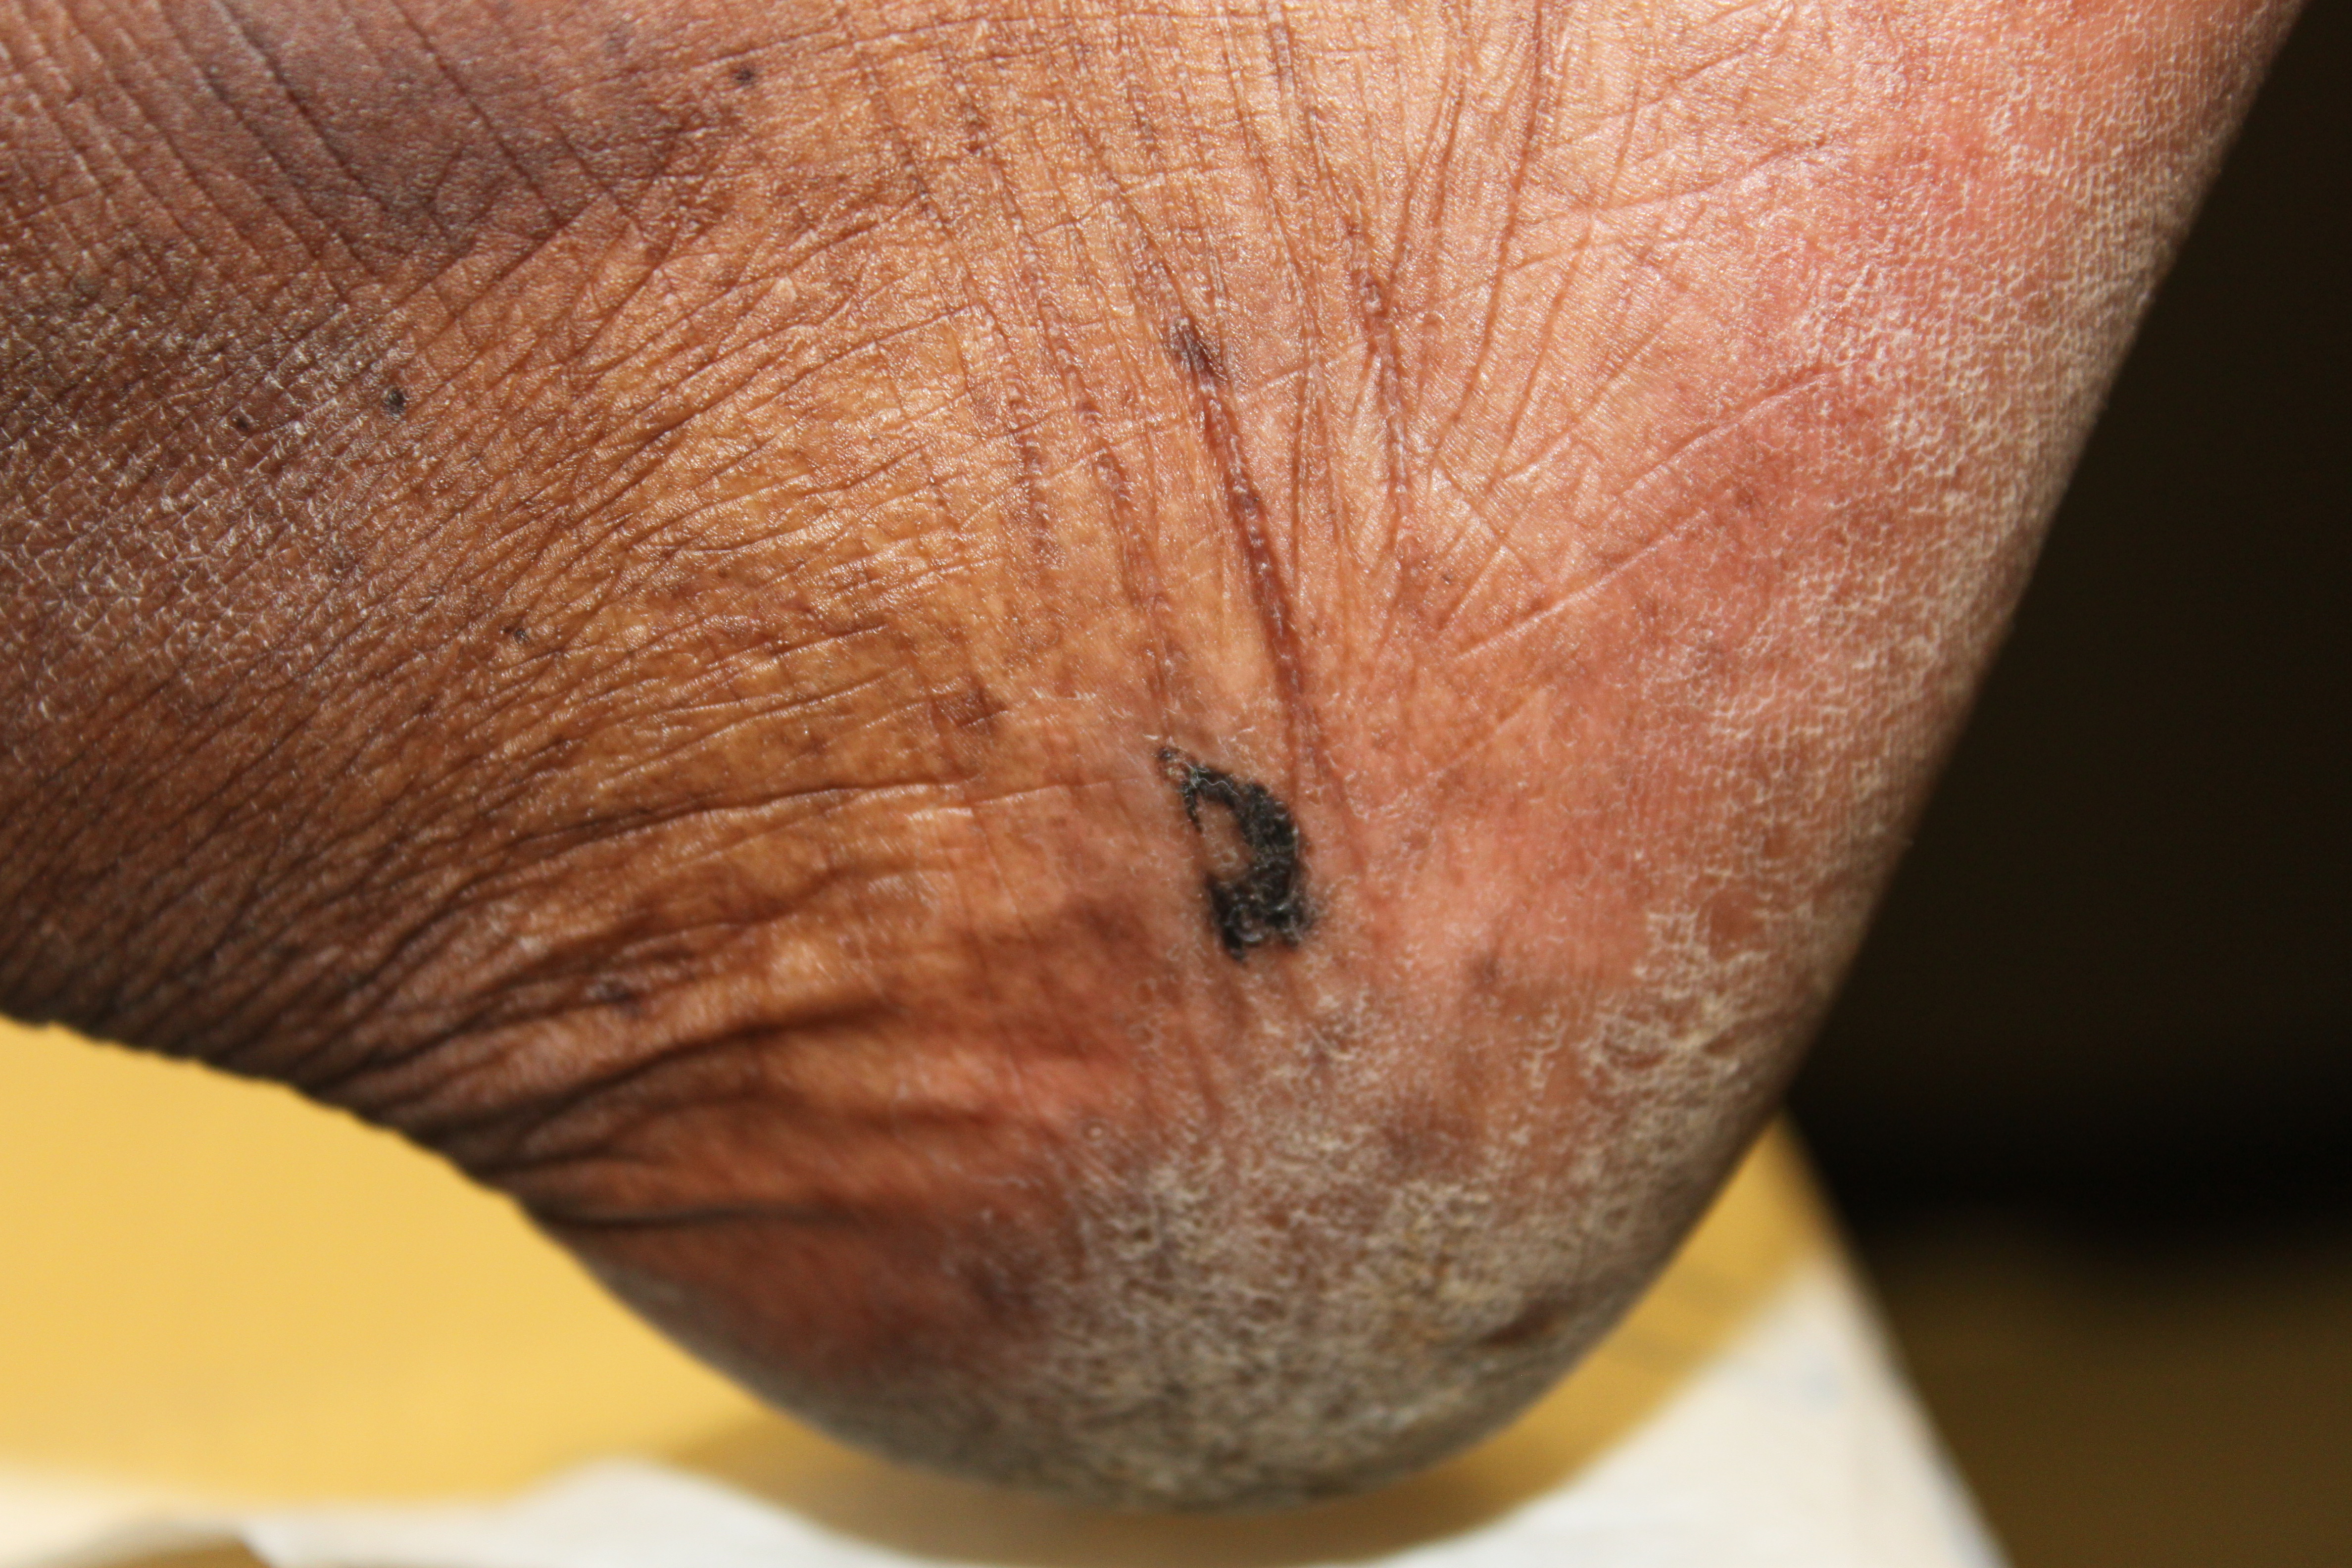 Melanocytic nevus on the right heel of a 62 year old male diabetic.